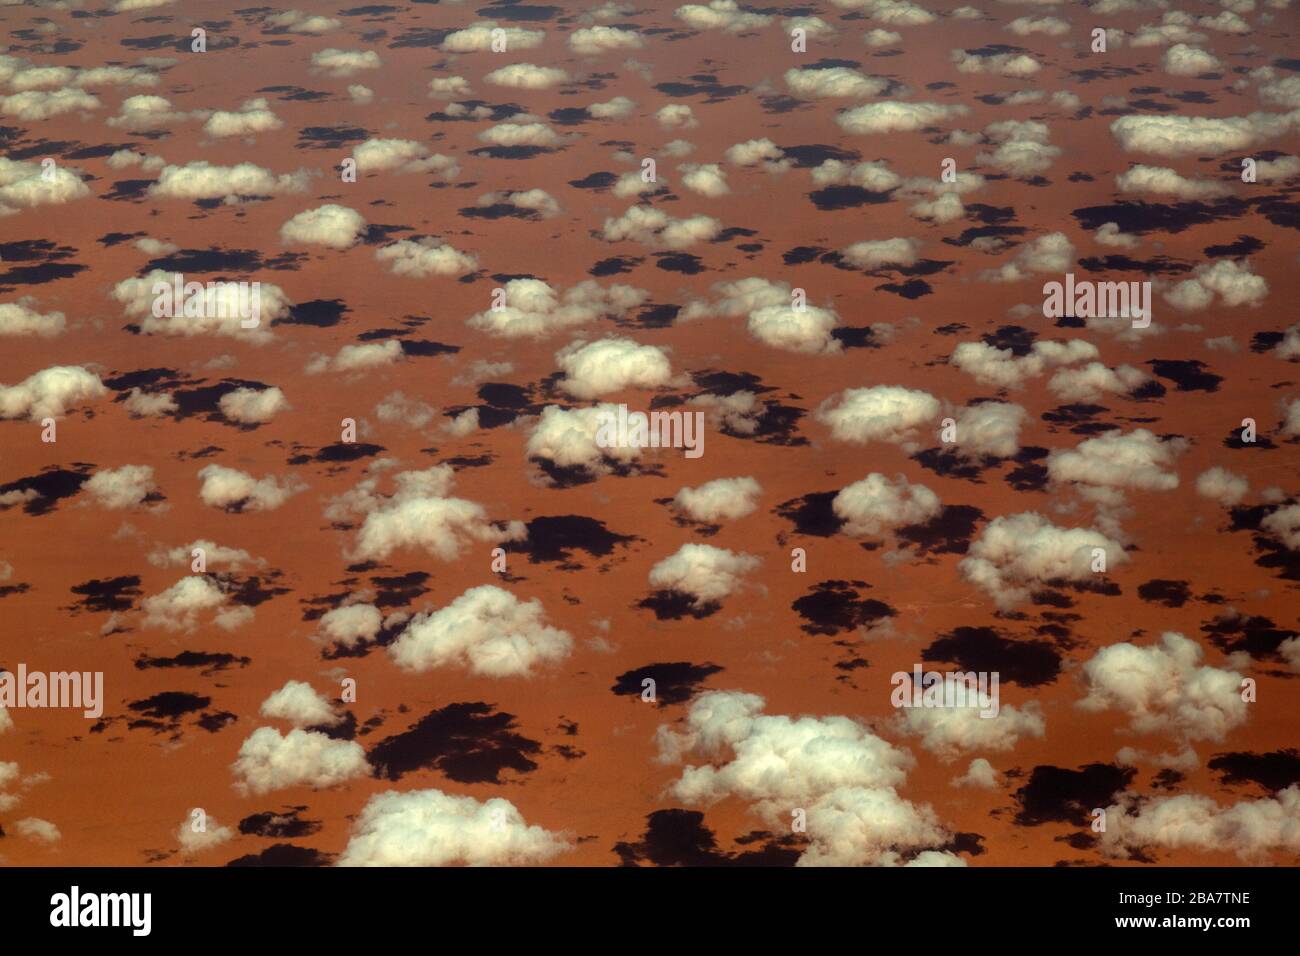 Aerial photograph of small clouds over desert sands in Saudi Arabia, casting small shadows. Stock Photo